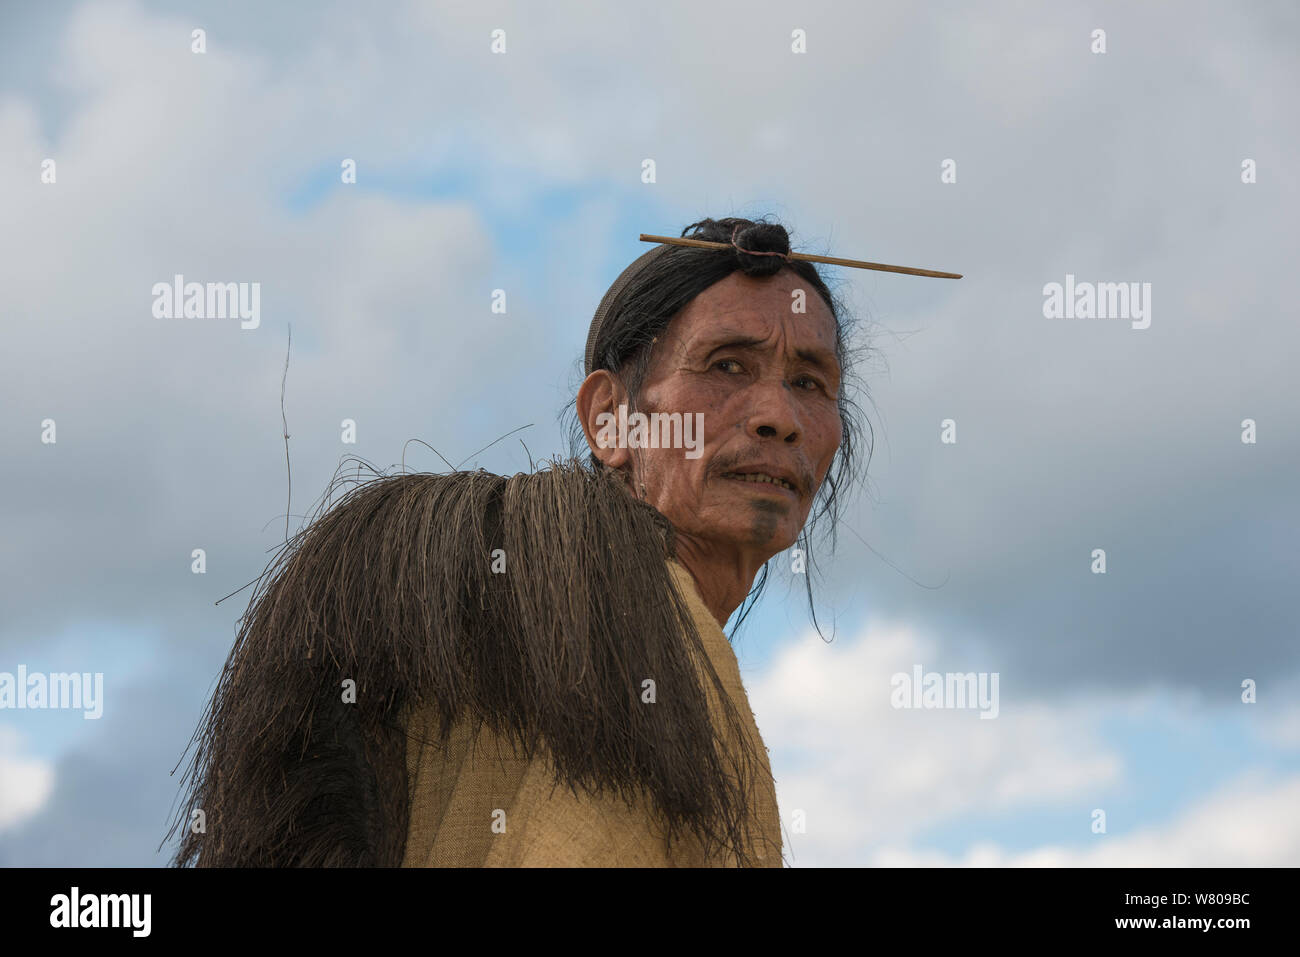 Apatani man with traditional hair knot fixed by a skewer or Piidin Khotu and traditional Lecha over shoulder and cane hat which includes a hornbills beak. Apatani Tribe, Ziro Valley, Himalayan Foothills, Arunachal Pradesh.North East India, November 2014. Stock Photo